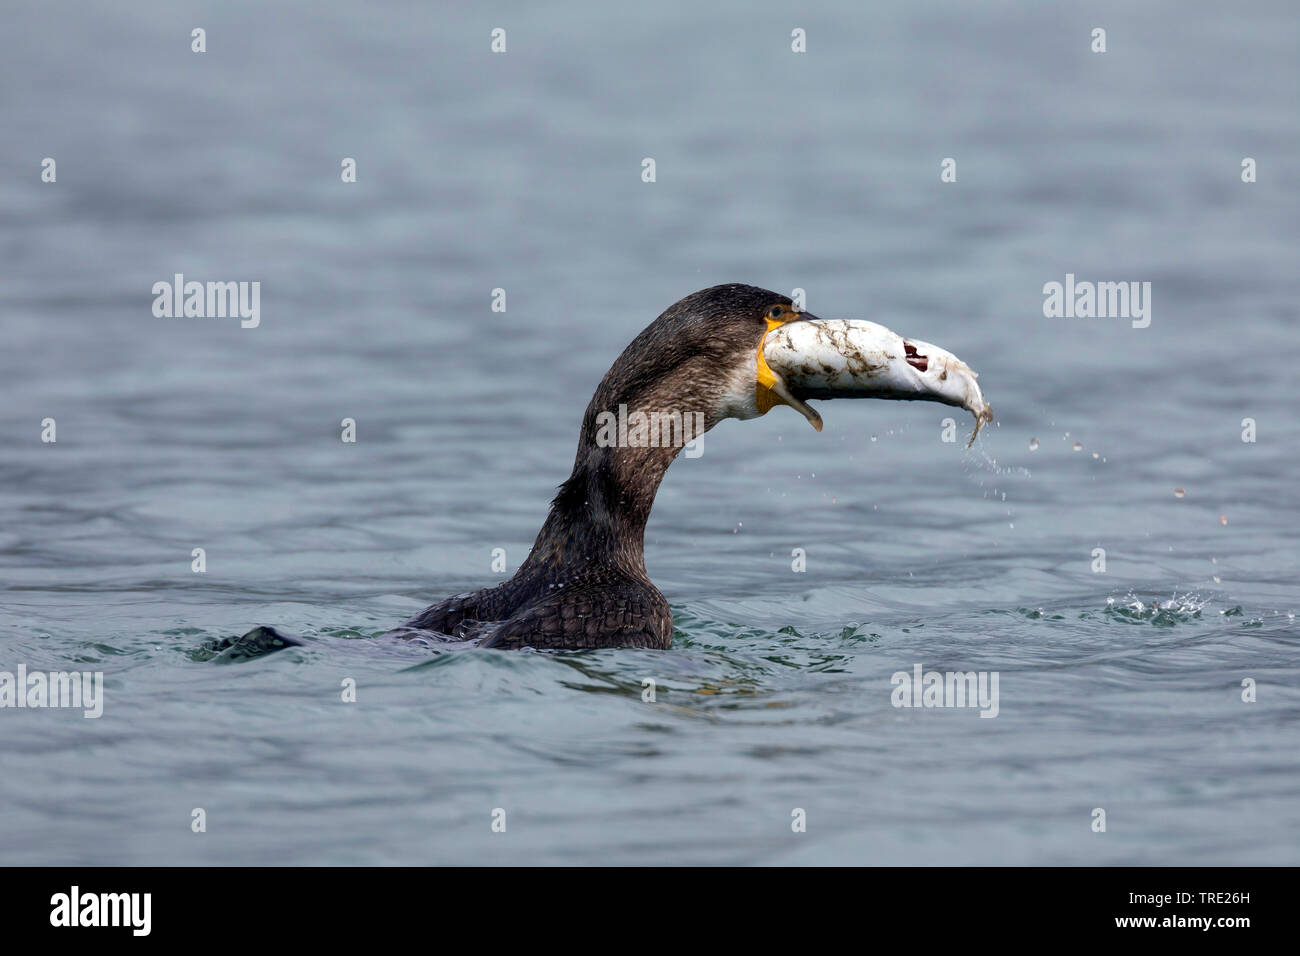 great cormorant (Phalacrocorax carbo), swimming with preyed mackerel, gulping the large prey, side view, Iceland Stock Photo